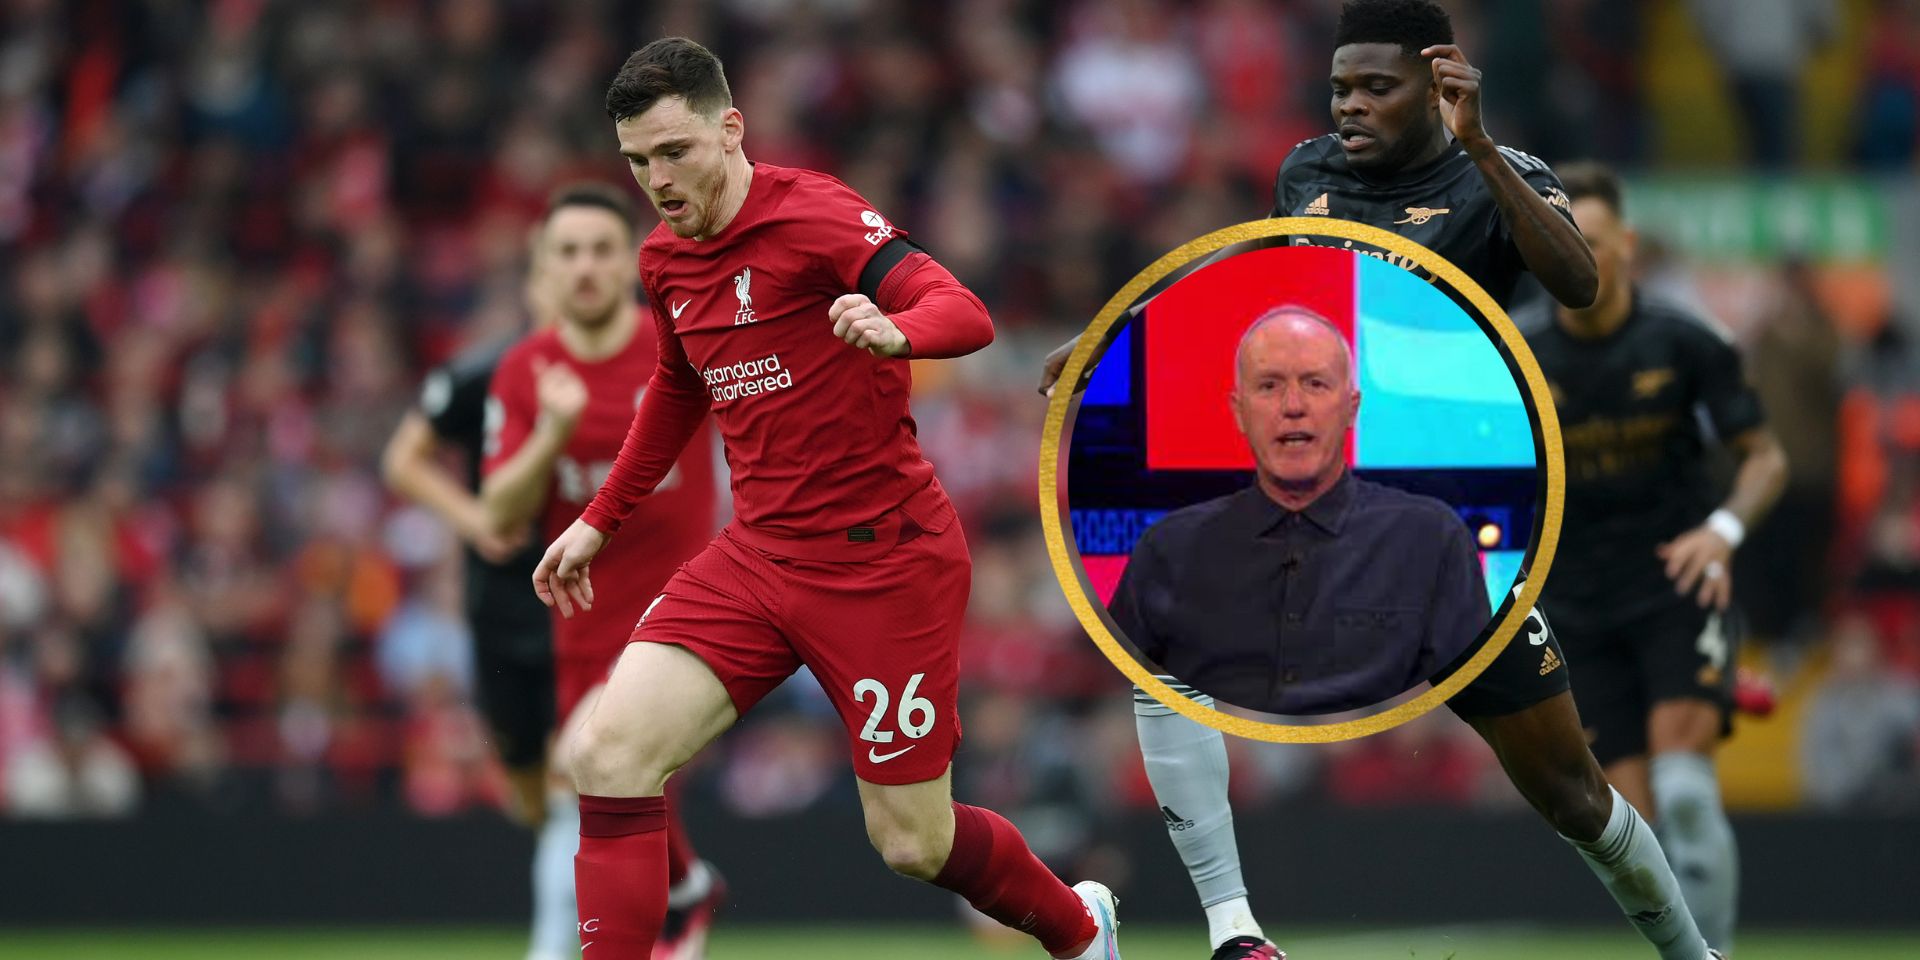 ‘Robertson instigated the dispute’ – Ex-refs pile in on Robertson blame game